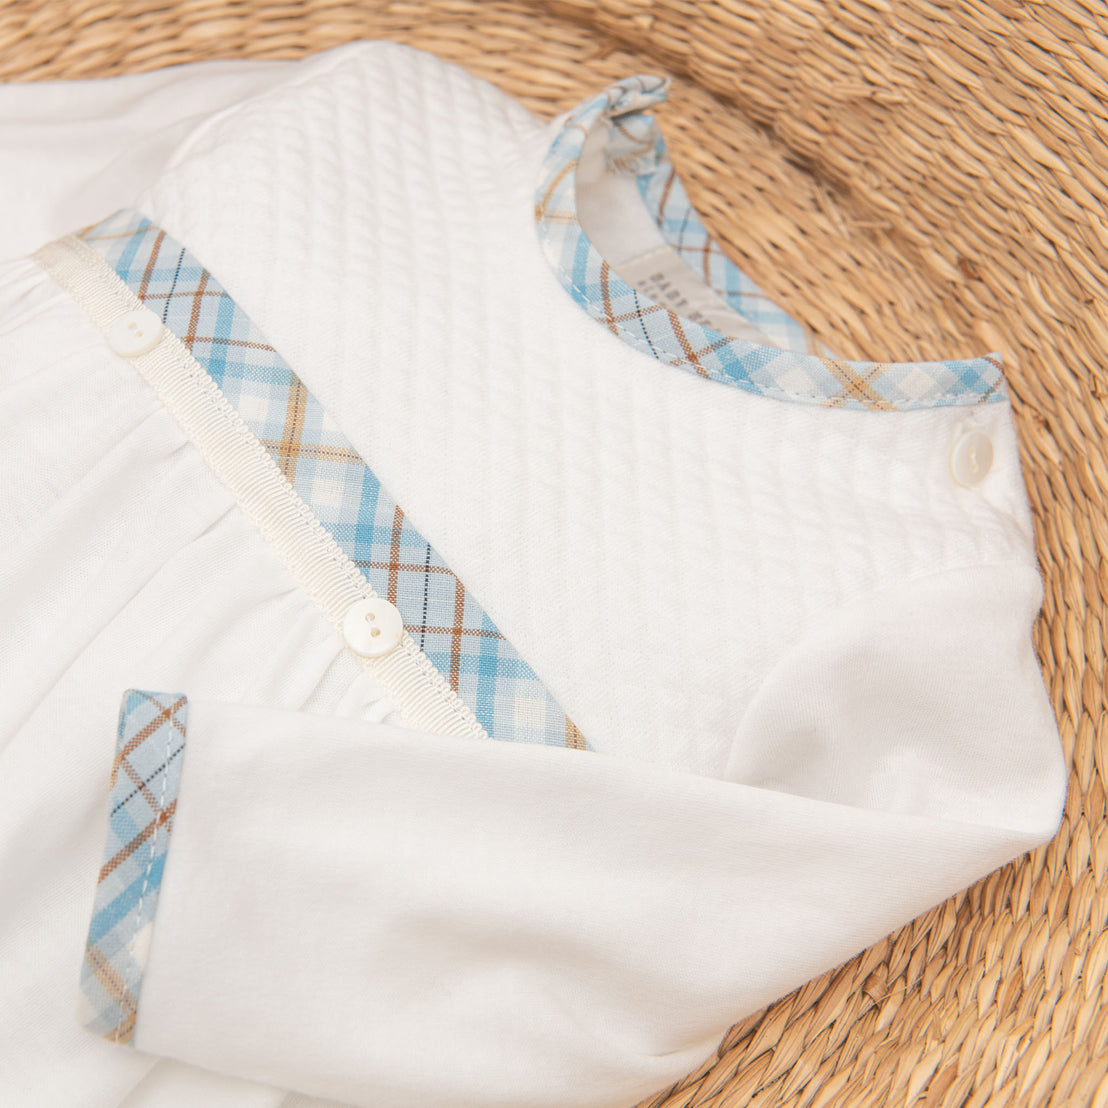 White Mason Newborn Gift Set with plaid blue and beige accents on a wicker background, ideal for a christening. The garment has snap buttons for easy dressing.